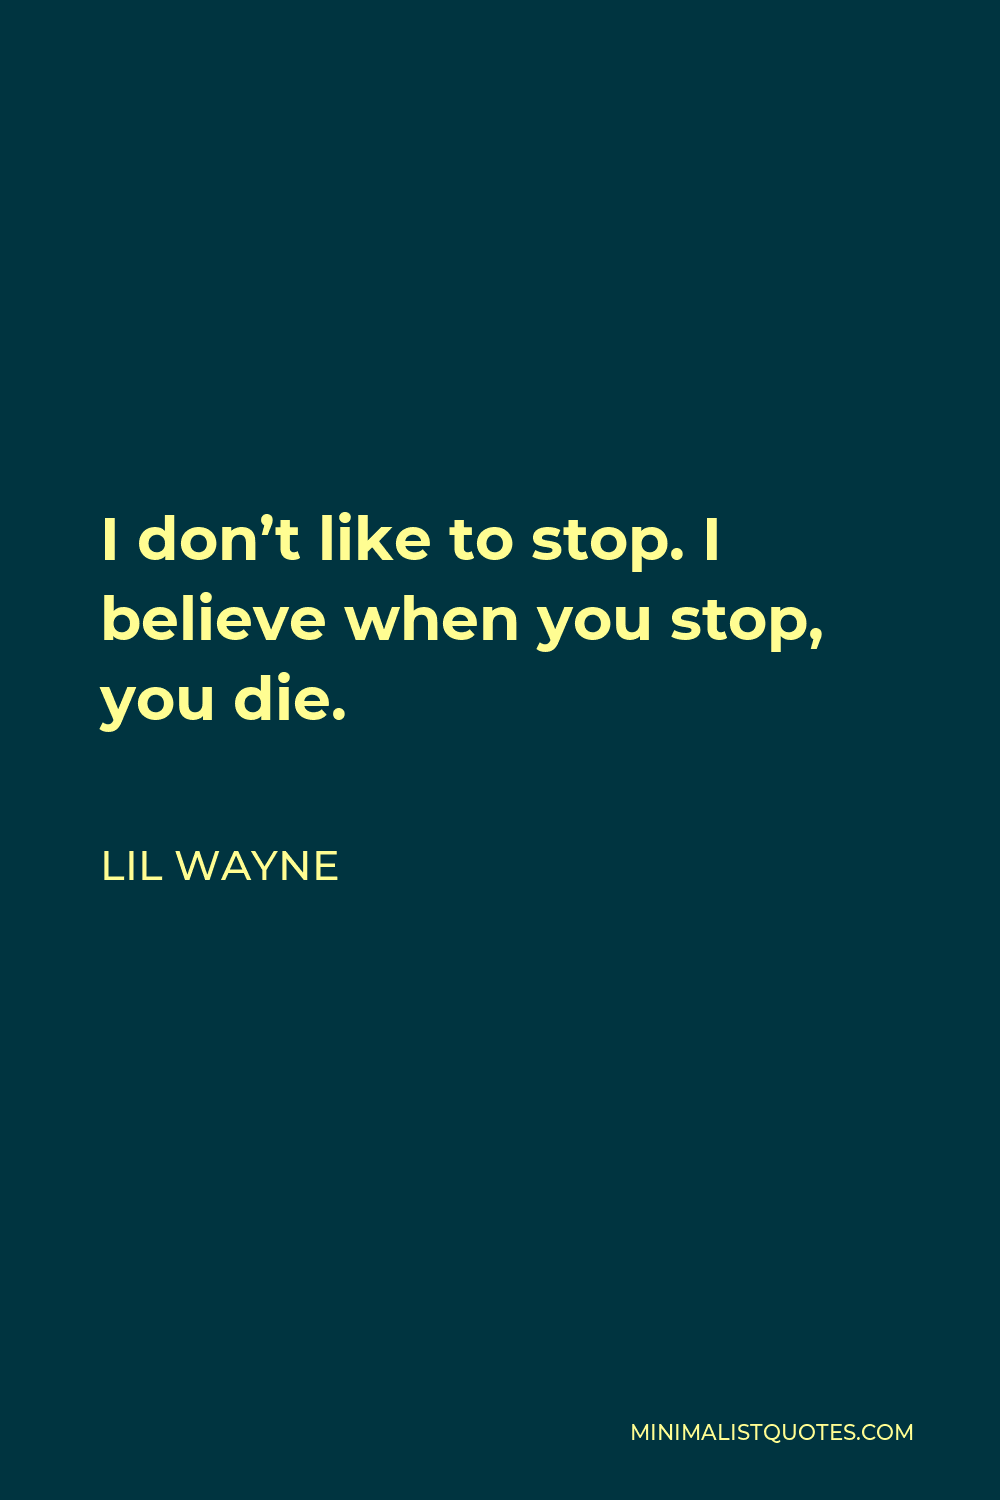 Lil Wayne Quote - I don’t like to stop. I believe when you stop, you die.